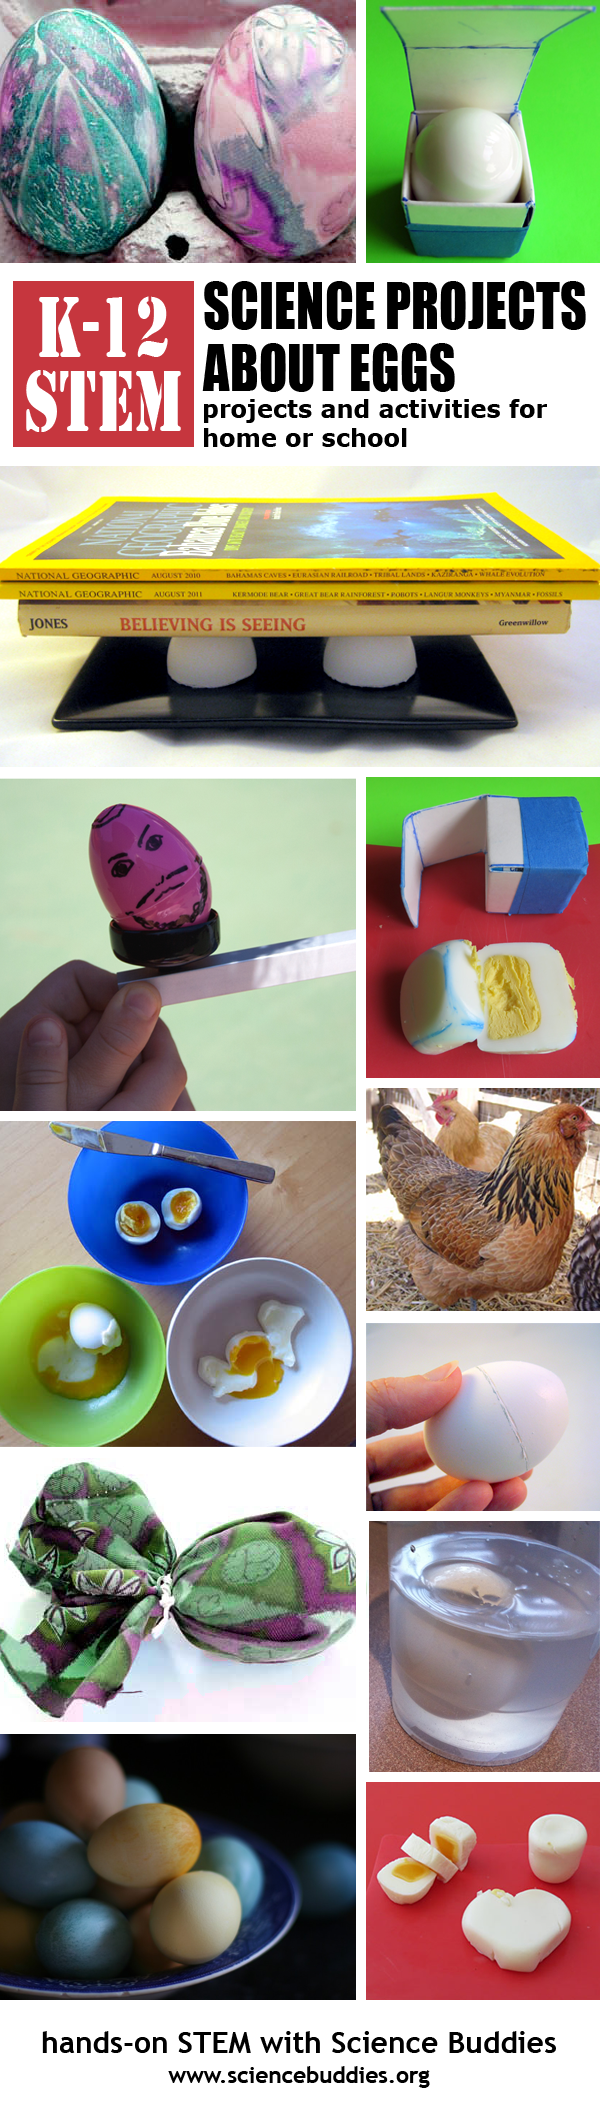 Photo collage of science experiments revolving around eggs